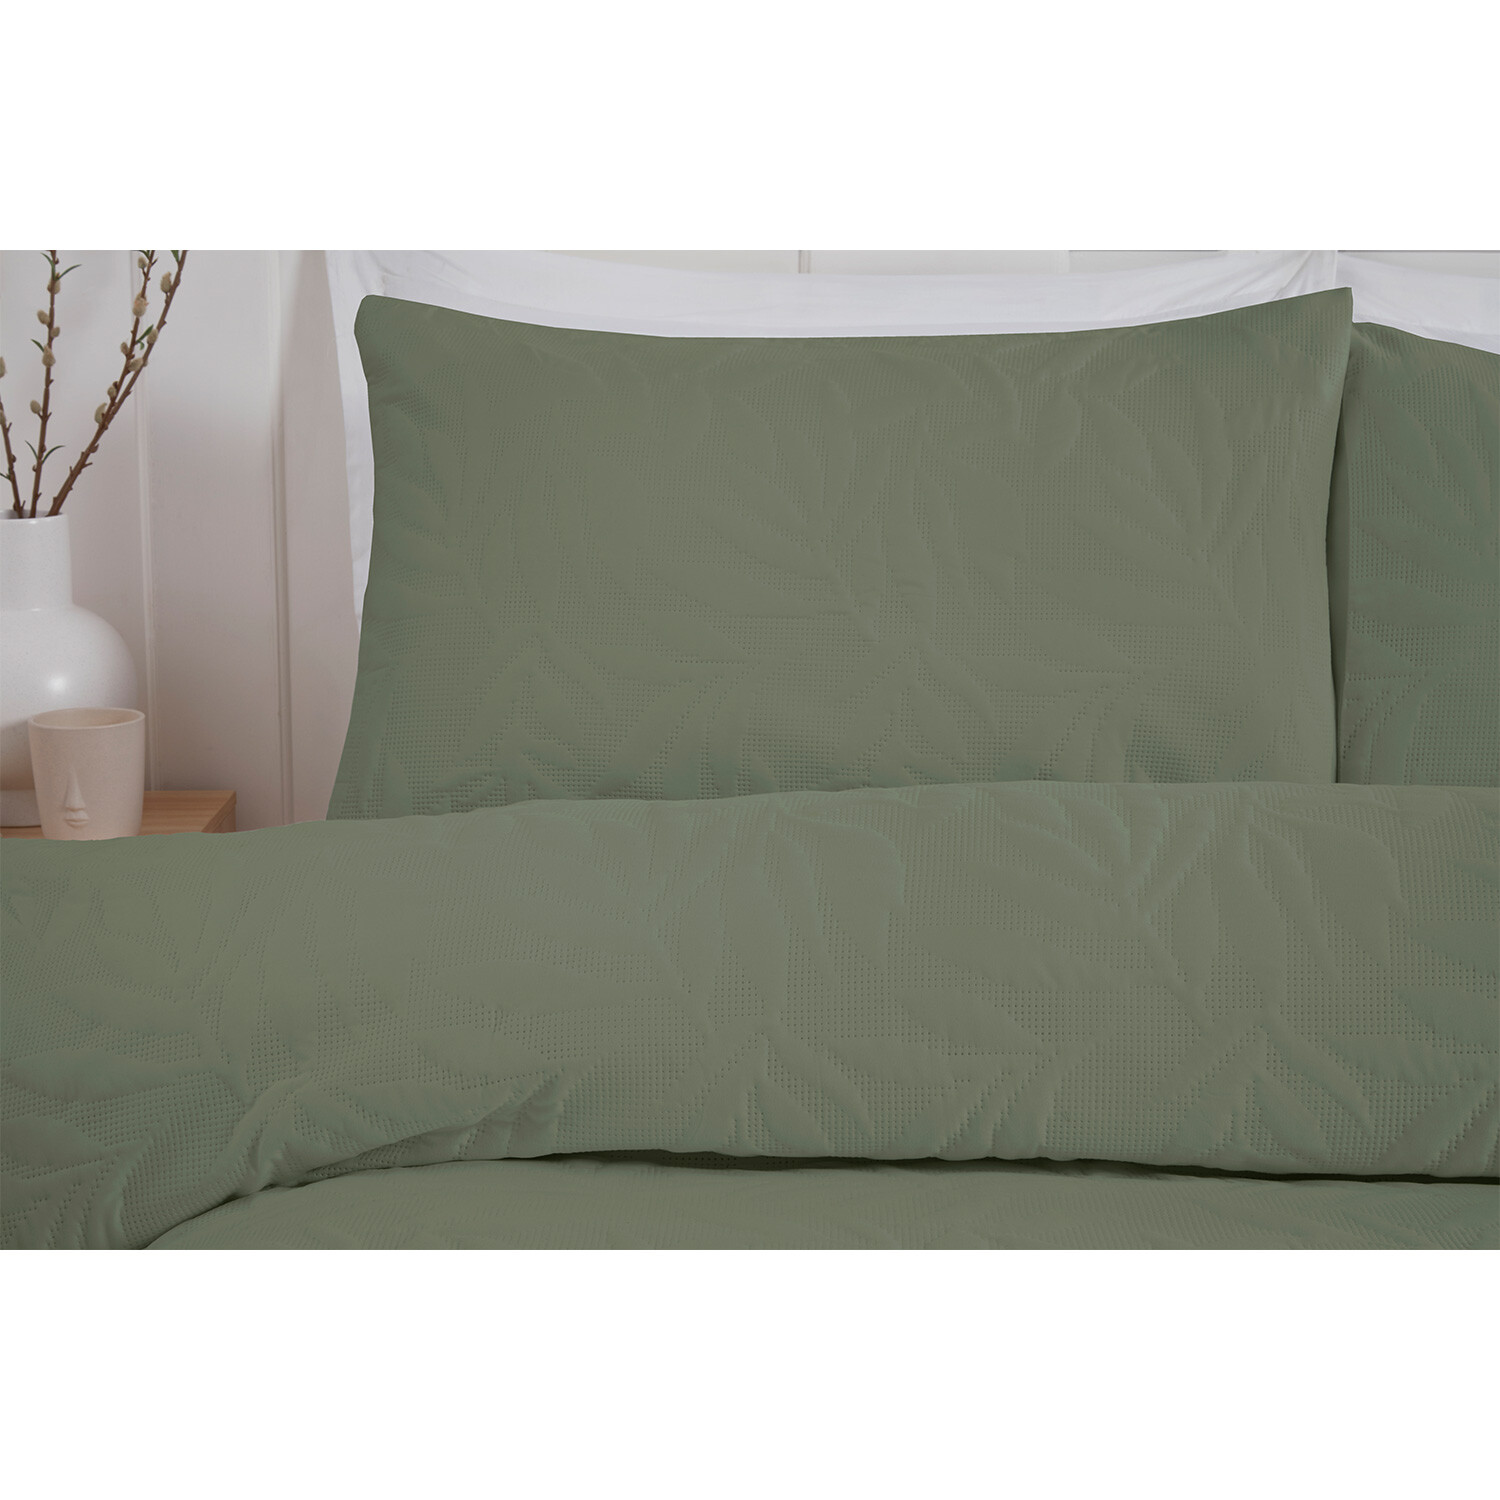 Avery Leaf Duvet Cover and Pillowcase Set - Olive Green / Superking Image 2